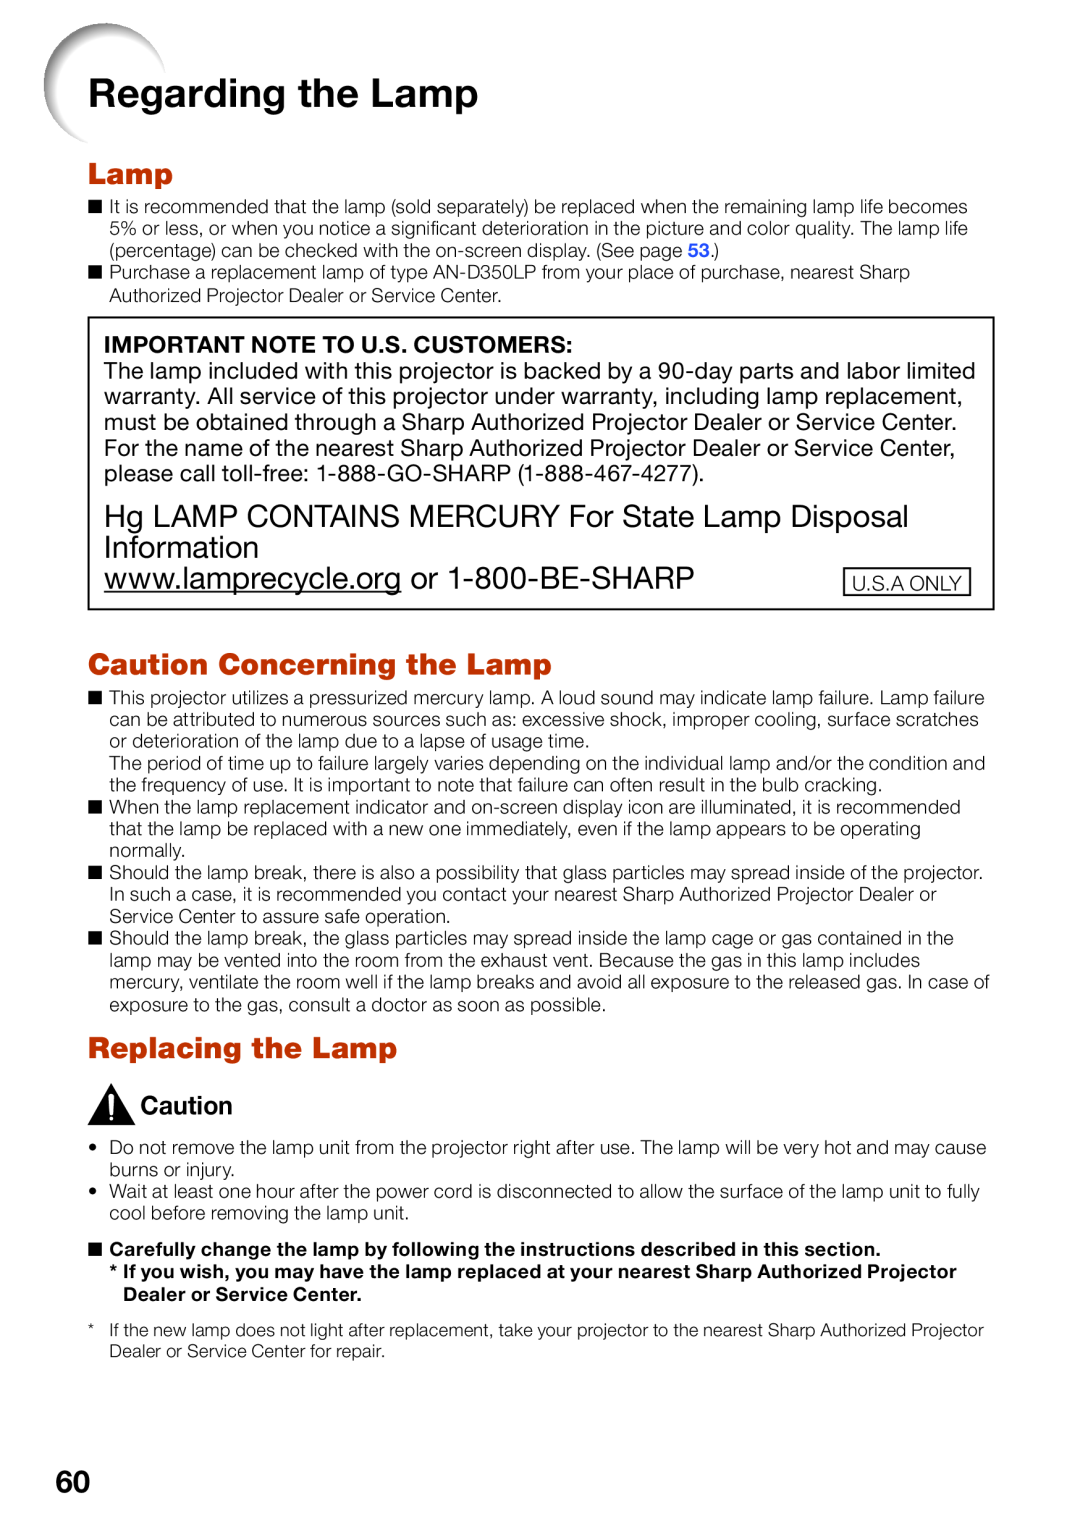 Sharp PG-D3050W Regarding the Lamp, Hg LAMP CONTAINS MERCURY For State Lamp Disposal Information, Replacing the Lamp 